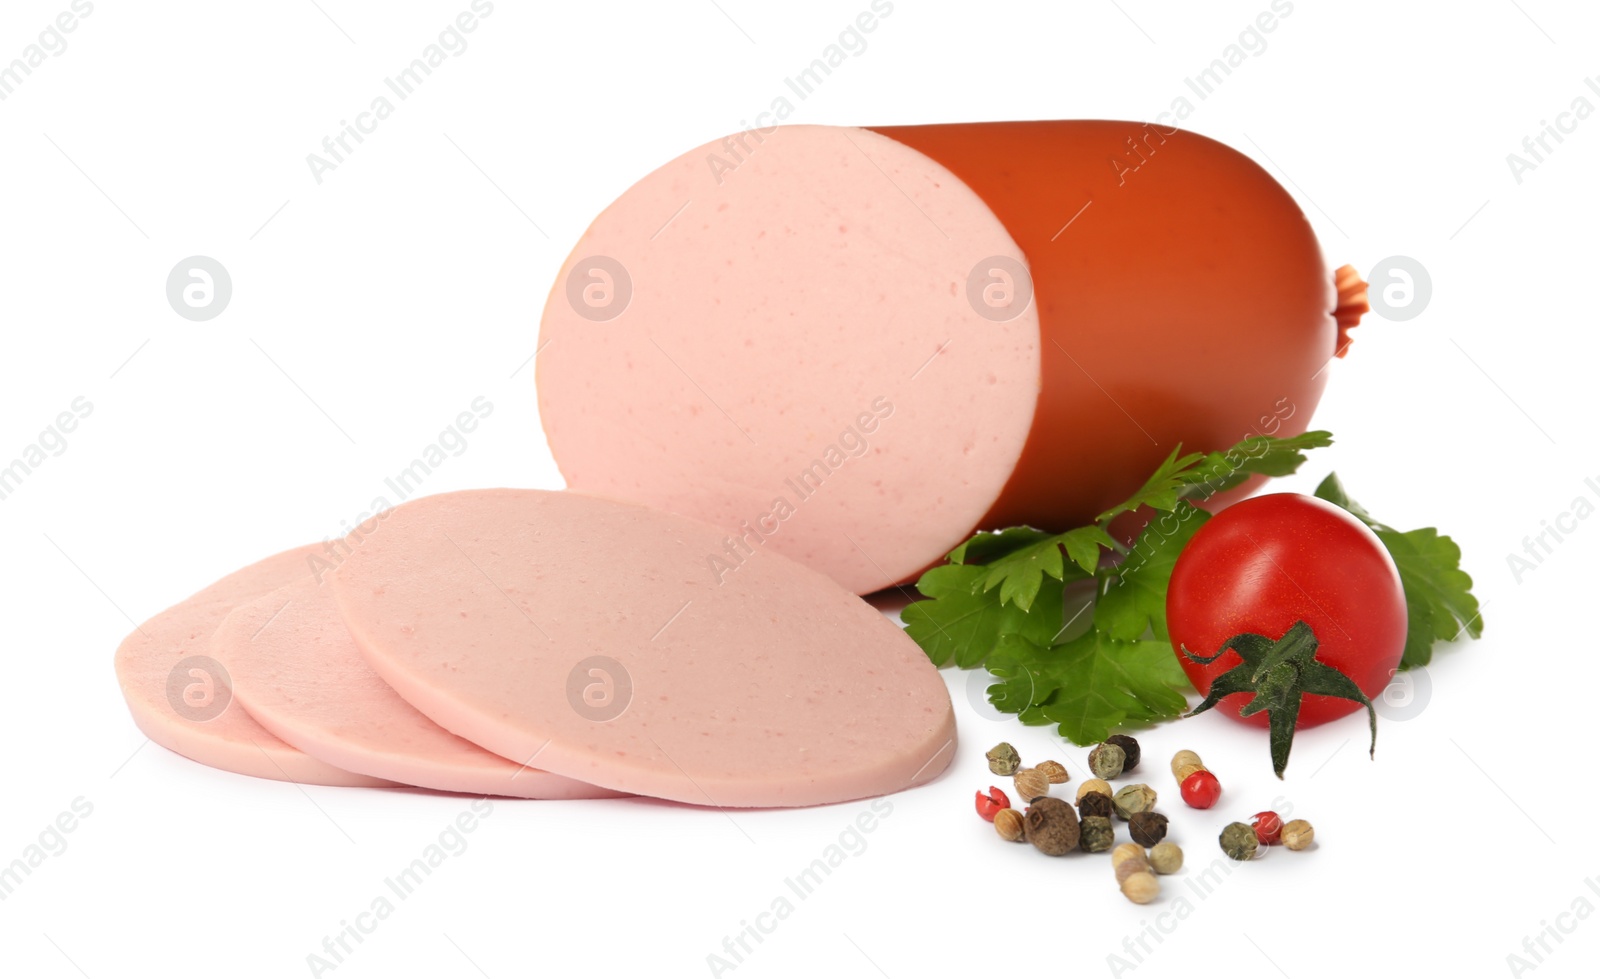 Photo of Tasty boiled sausage with tomato, parsley and peppercorns on white background